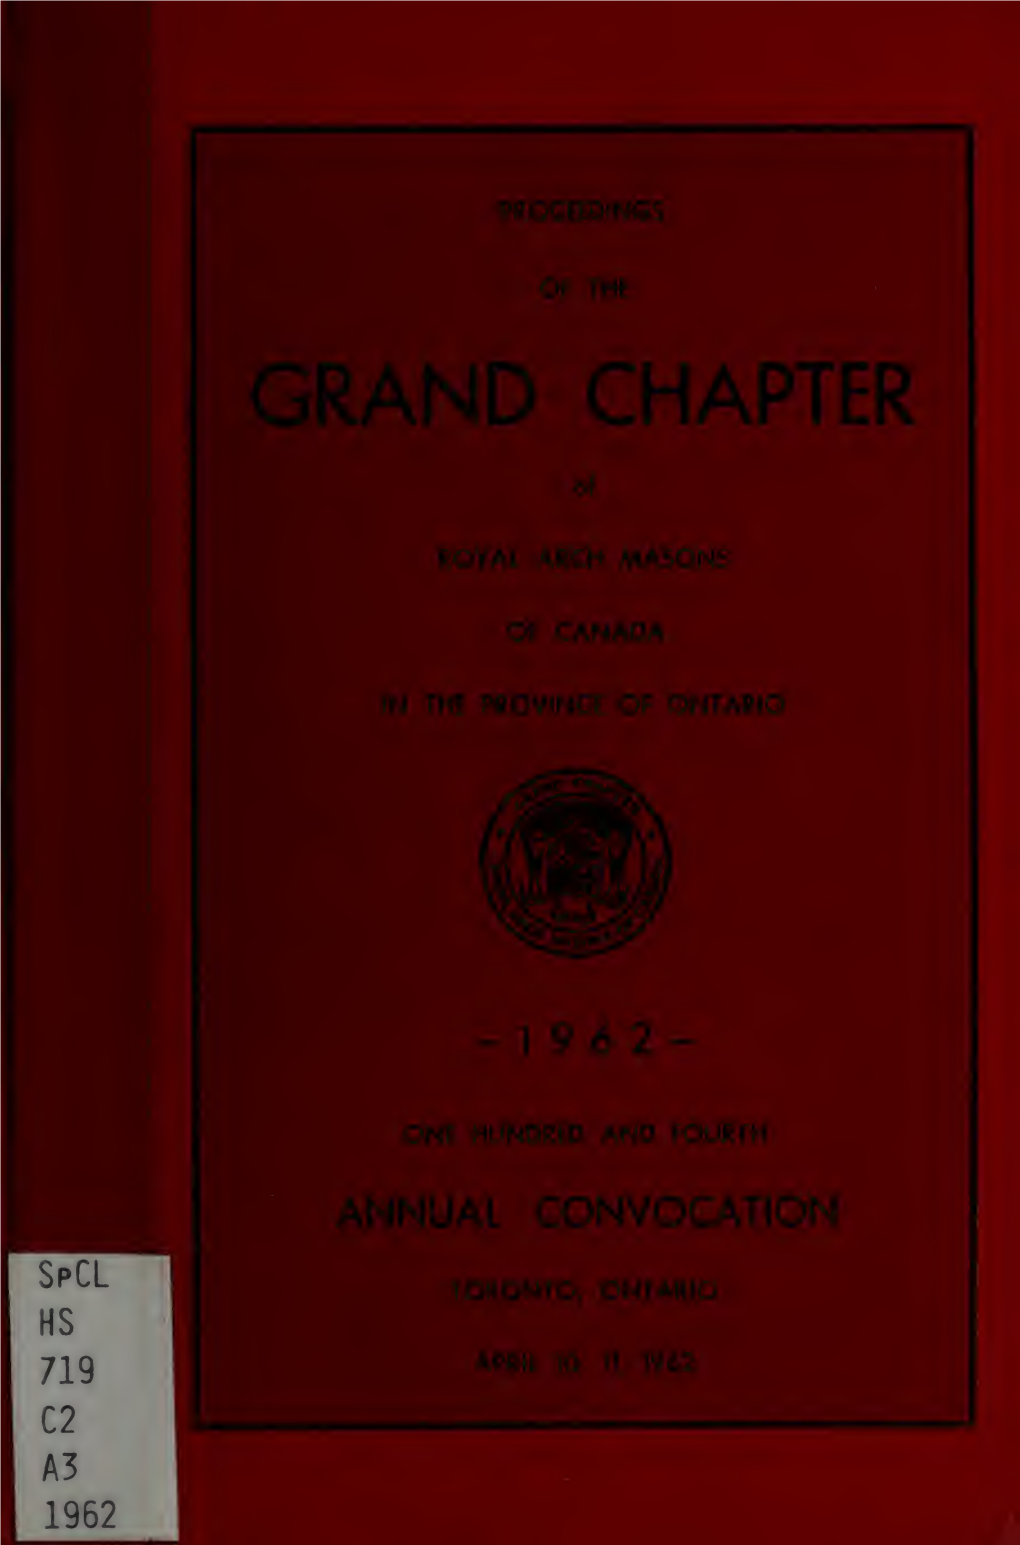 Proceedings of the Grand Chapter of Royal Arch Masons of Canada At